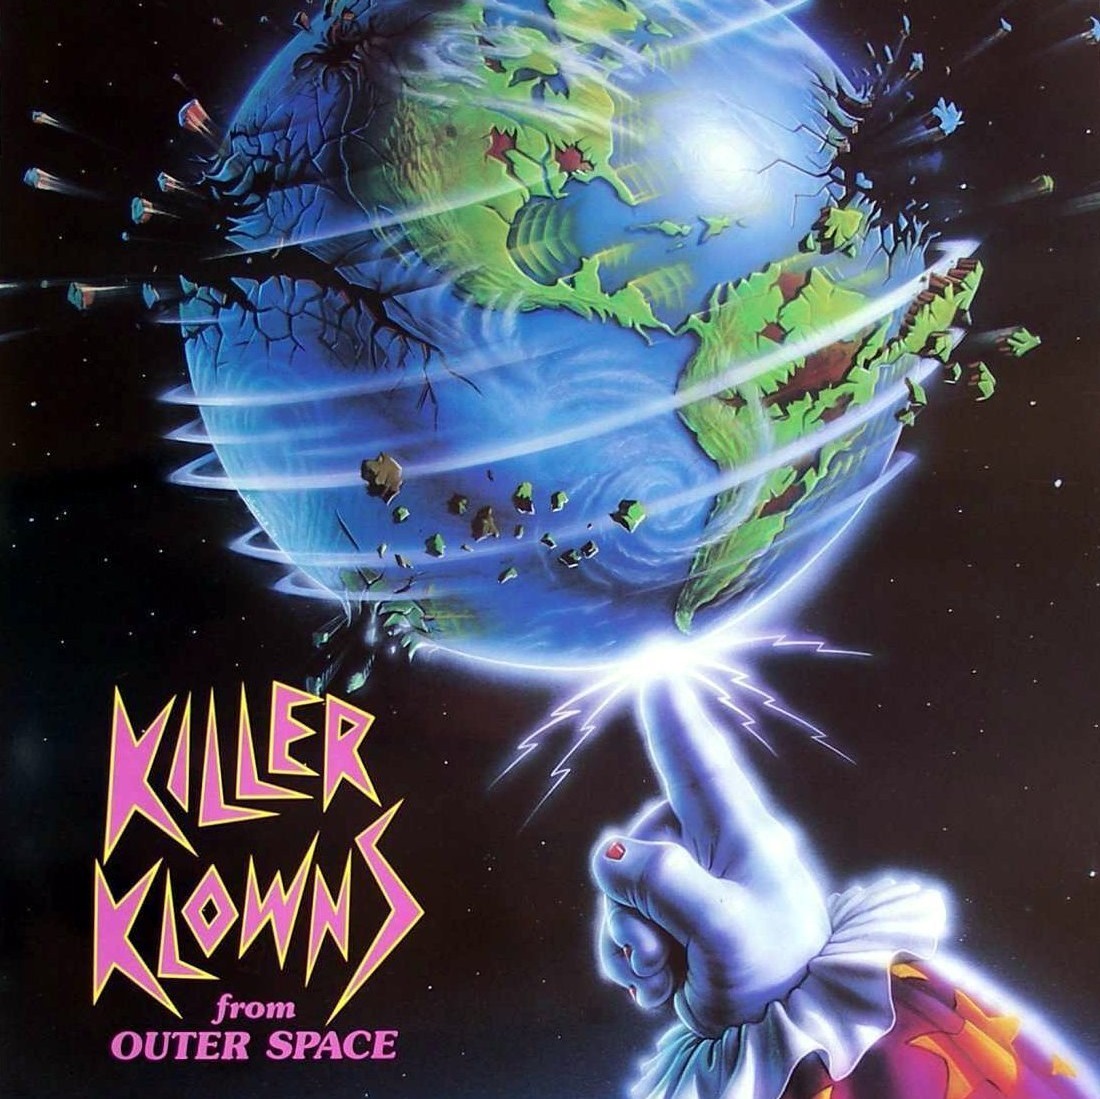 Episode 52 – Killer Klowns from Outer Space